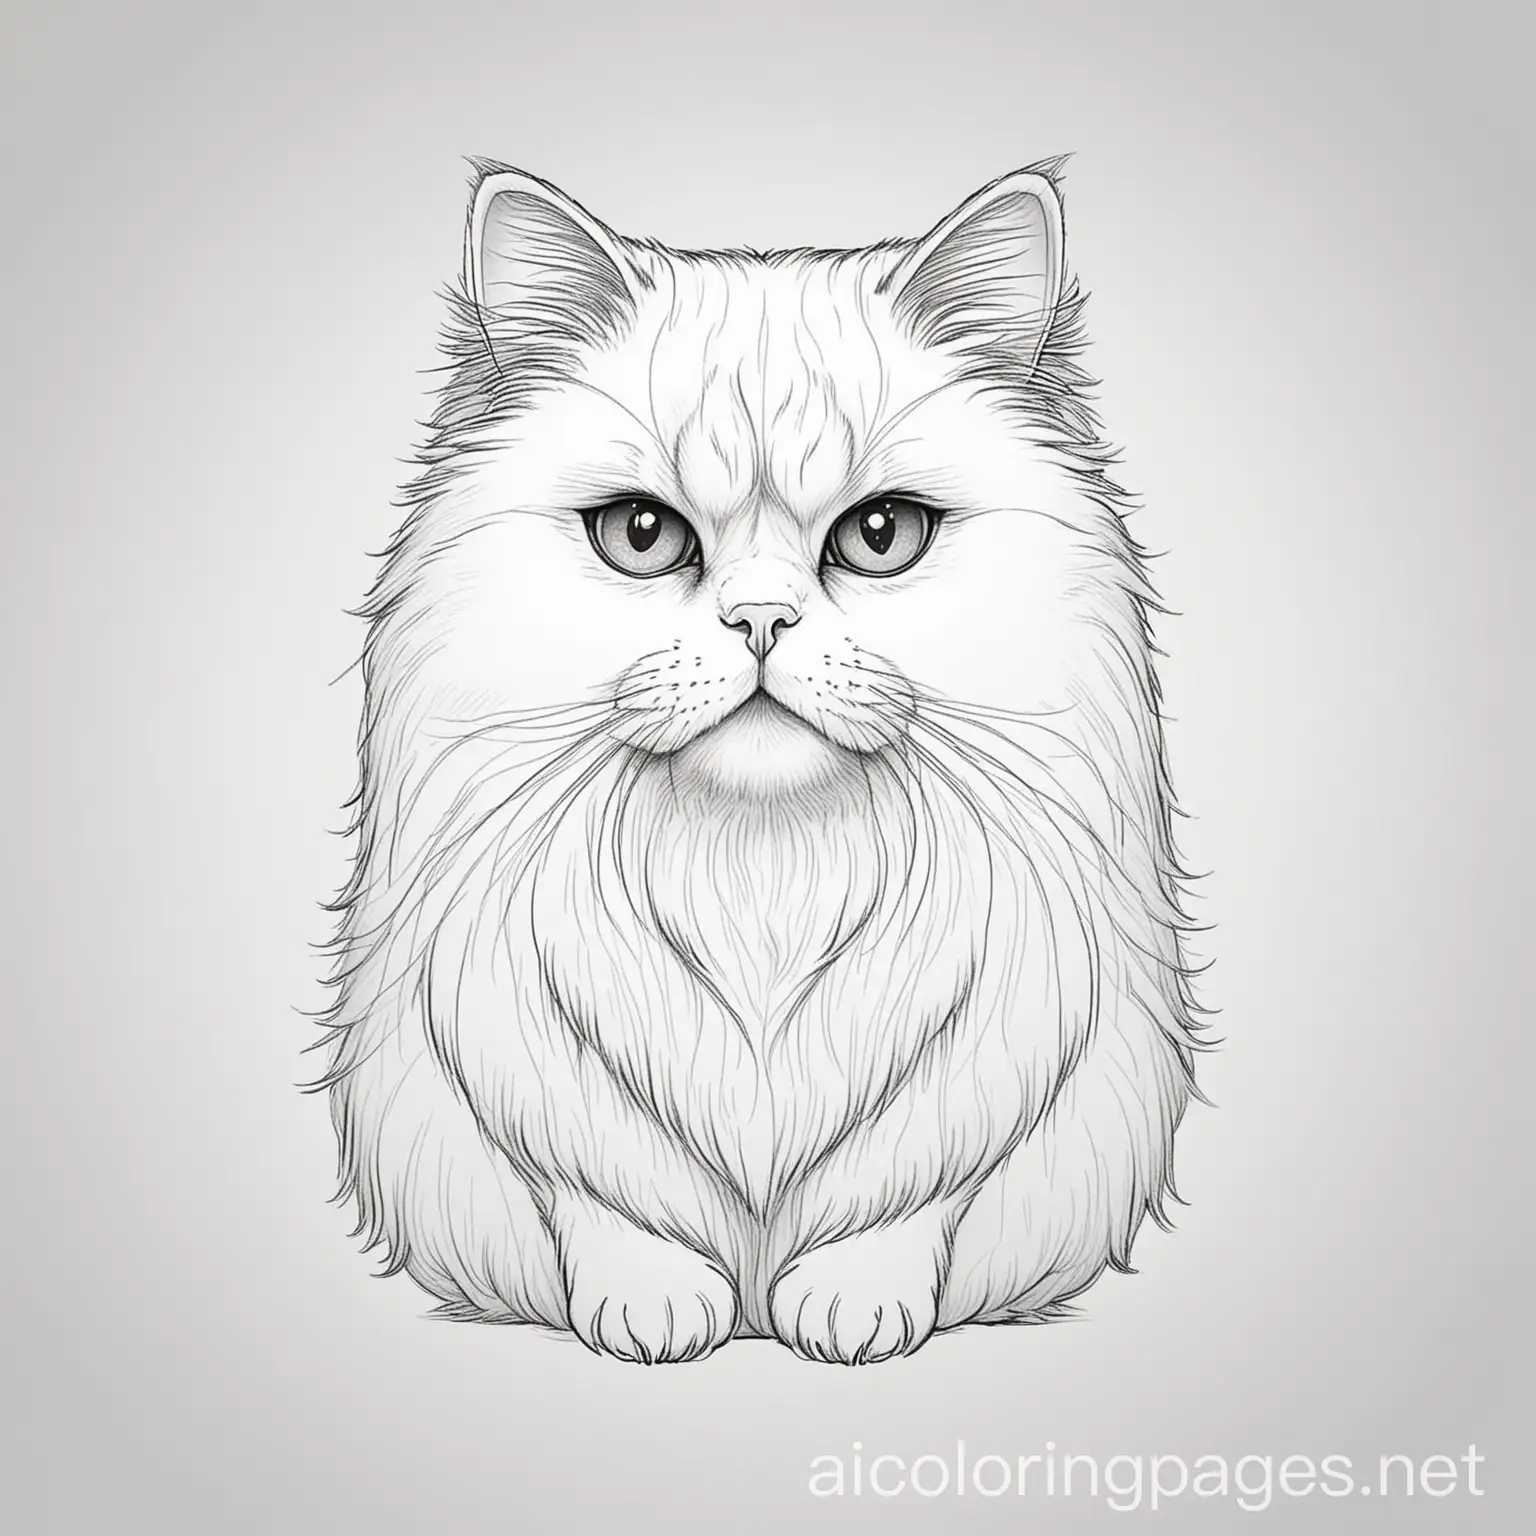 Persian cat linear design, Coloring Page, black and white, line art, white background, Simplicity, Ample White Space. The background of the coloring page is plain white to make it easy for young children to color within the lines. The outlines of all the subjects are easy to distinguish, making it simple for kids to color without too much difficulty